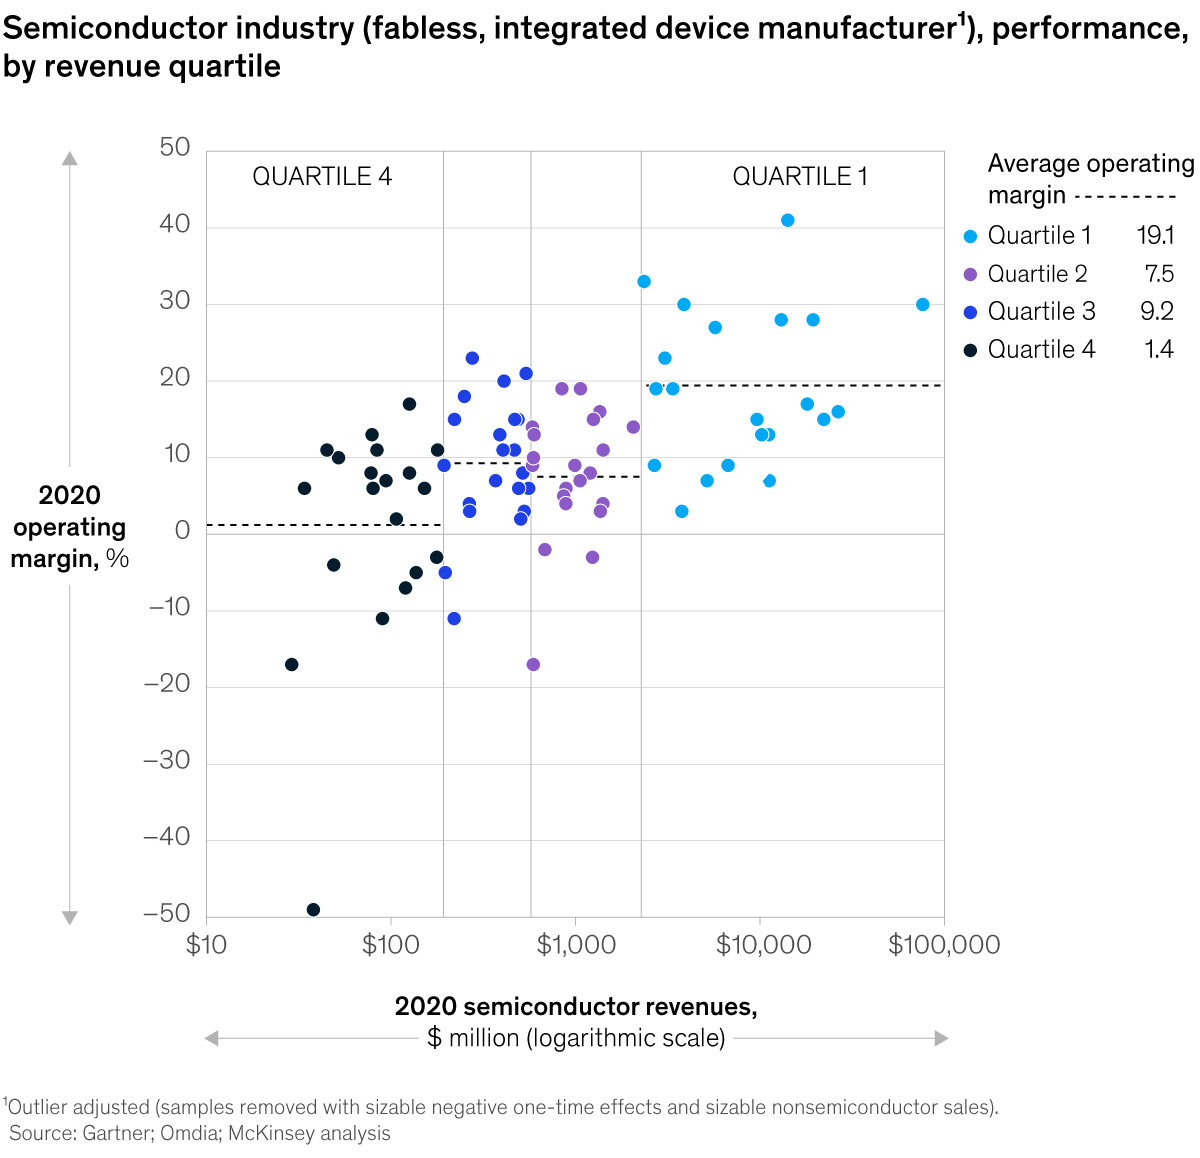 Chart of semiconductor industry performance